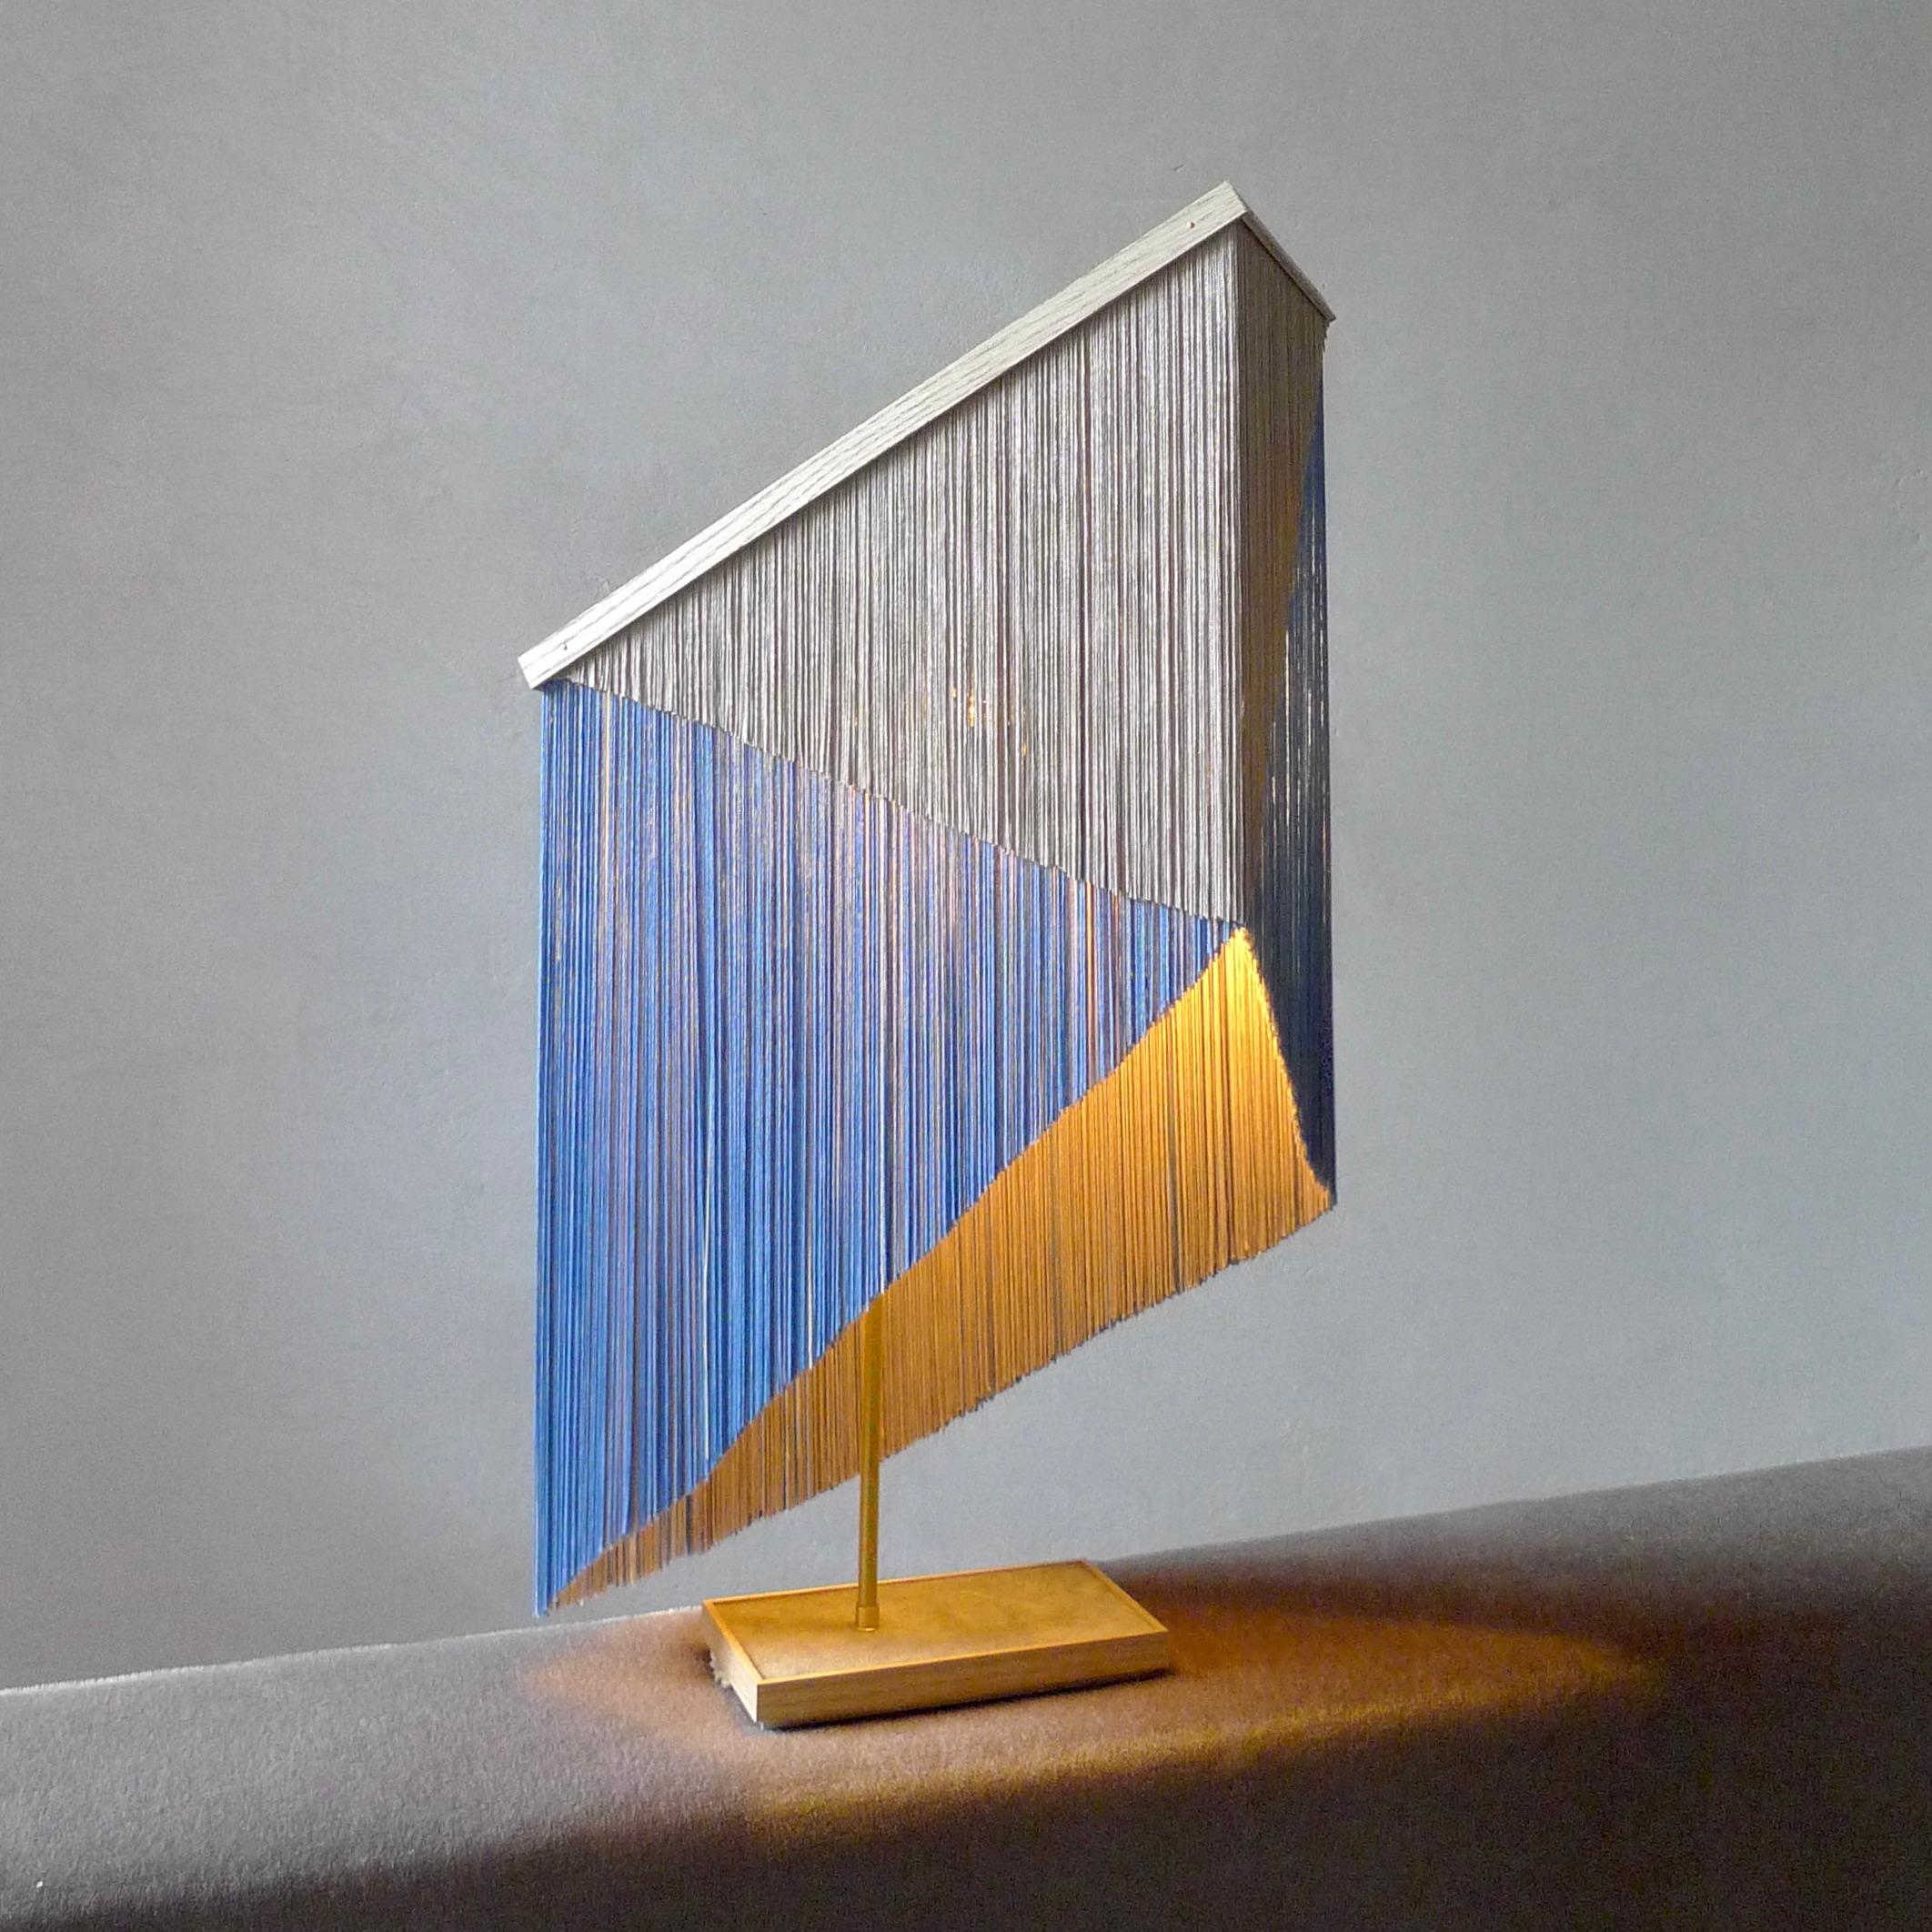 No. 30 table lamp by Sander Bottinga.
Object size 2
Dimensions: H 57-71 x W 41 x D 17 cm
Materials: Brass, wood, leather, viscose fringes.
Variations available.

Handmade in brass, wood, leather and 3 double layered viscose fringes in

geometric cut